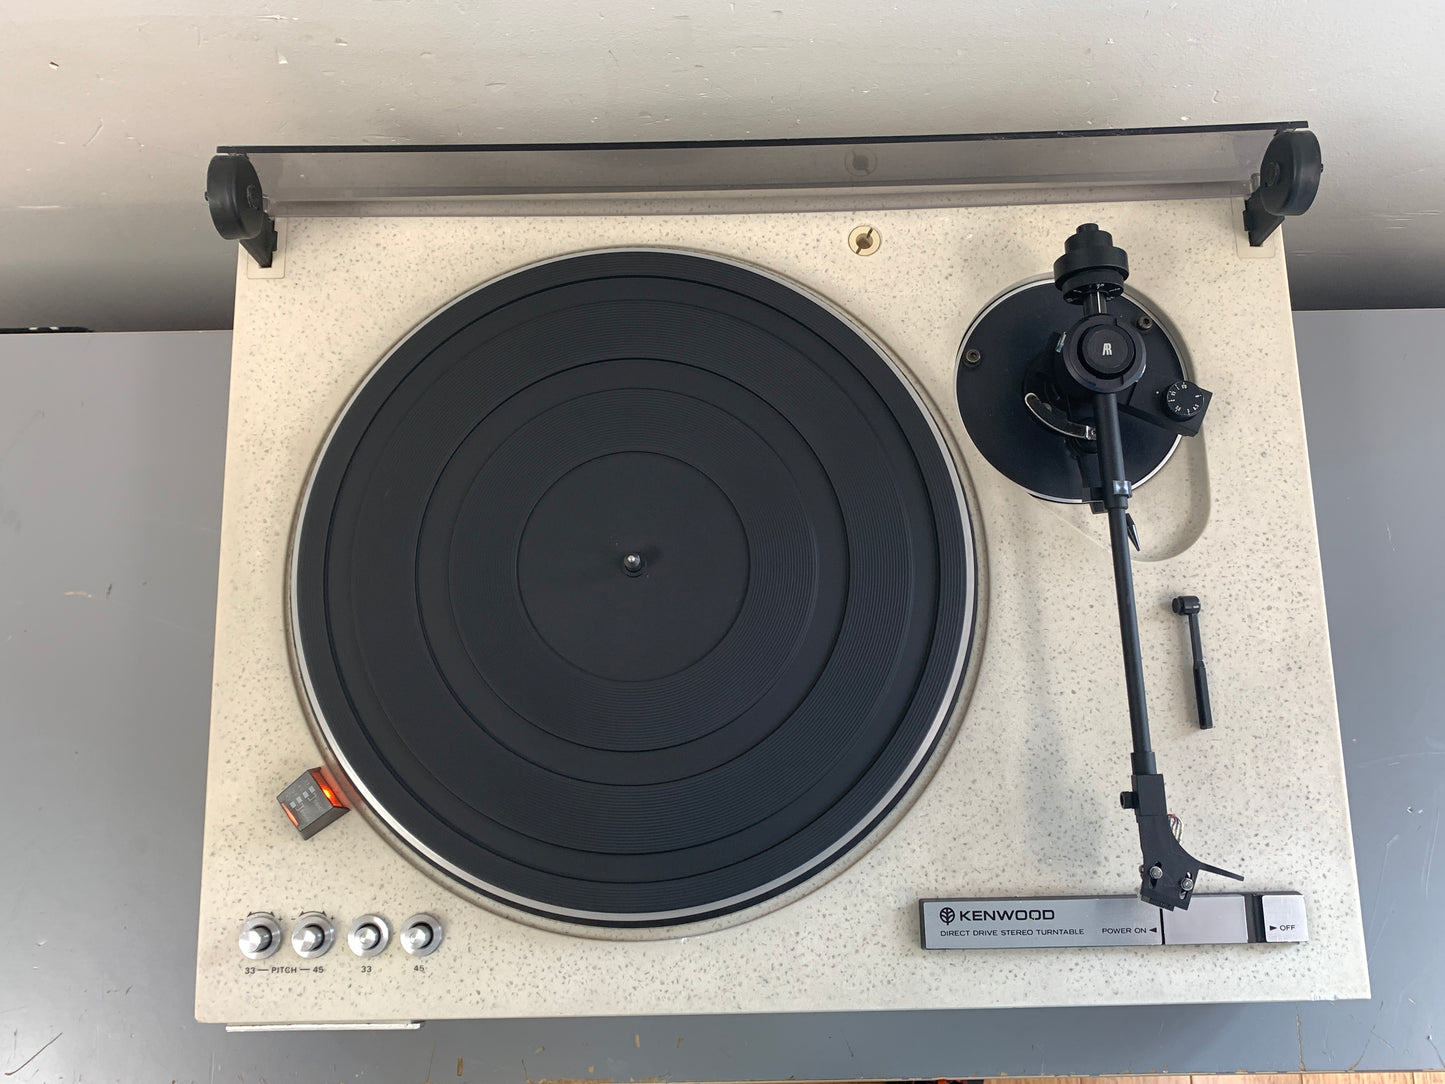 Kenwood KD-500 Turntable * AR Acoustic Research Tonearm * Shure M44 Cartridge * NEW Signal Cable * No Dust Cover